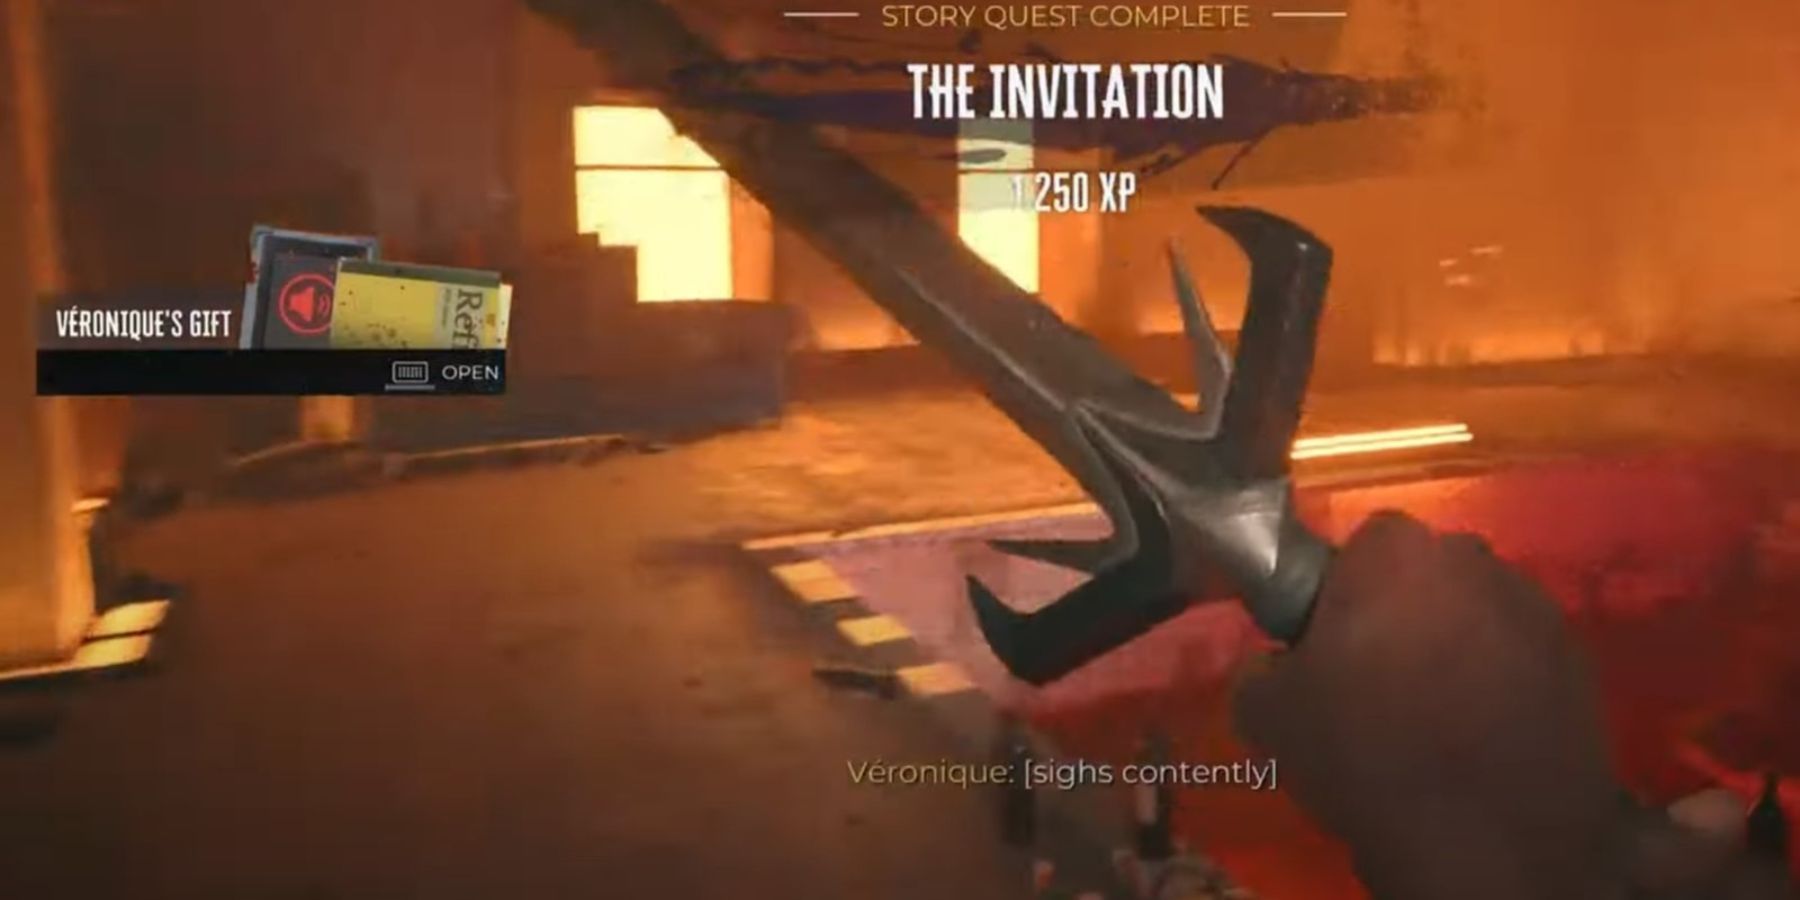 The Dead Island 2 character received XP rewards for completing The Invitation mission in Haus.